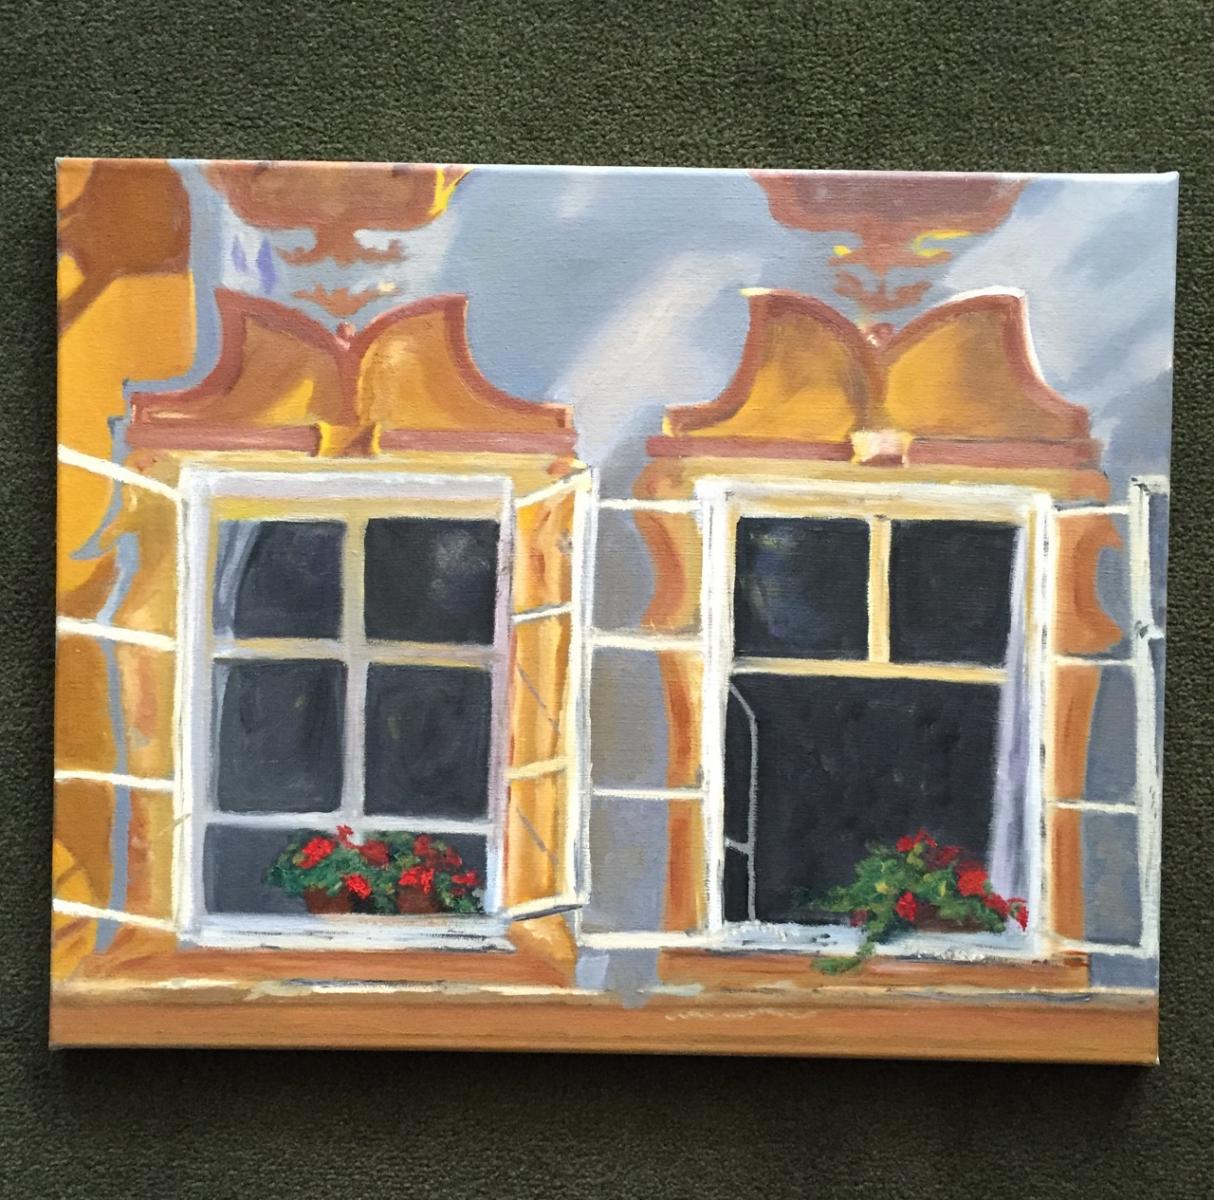 "Windows in Salzburg, Austria",
painted from a Photograph by Andre Baranowski from the book A Taste of Fantasy (For Sale $425) : Still Life : Susan Braha Photography and Fine Art